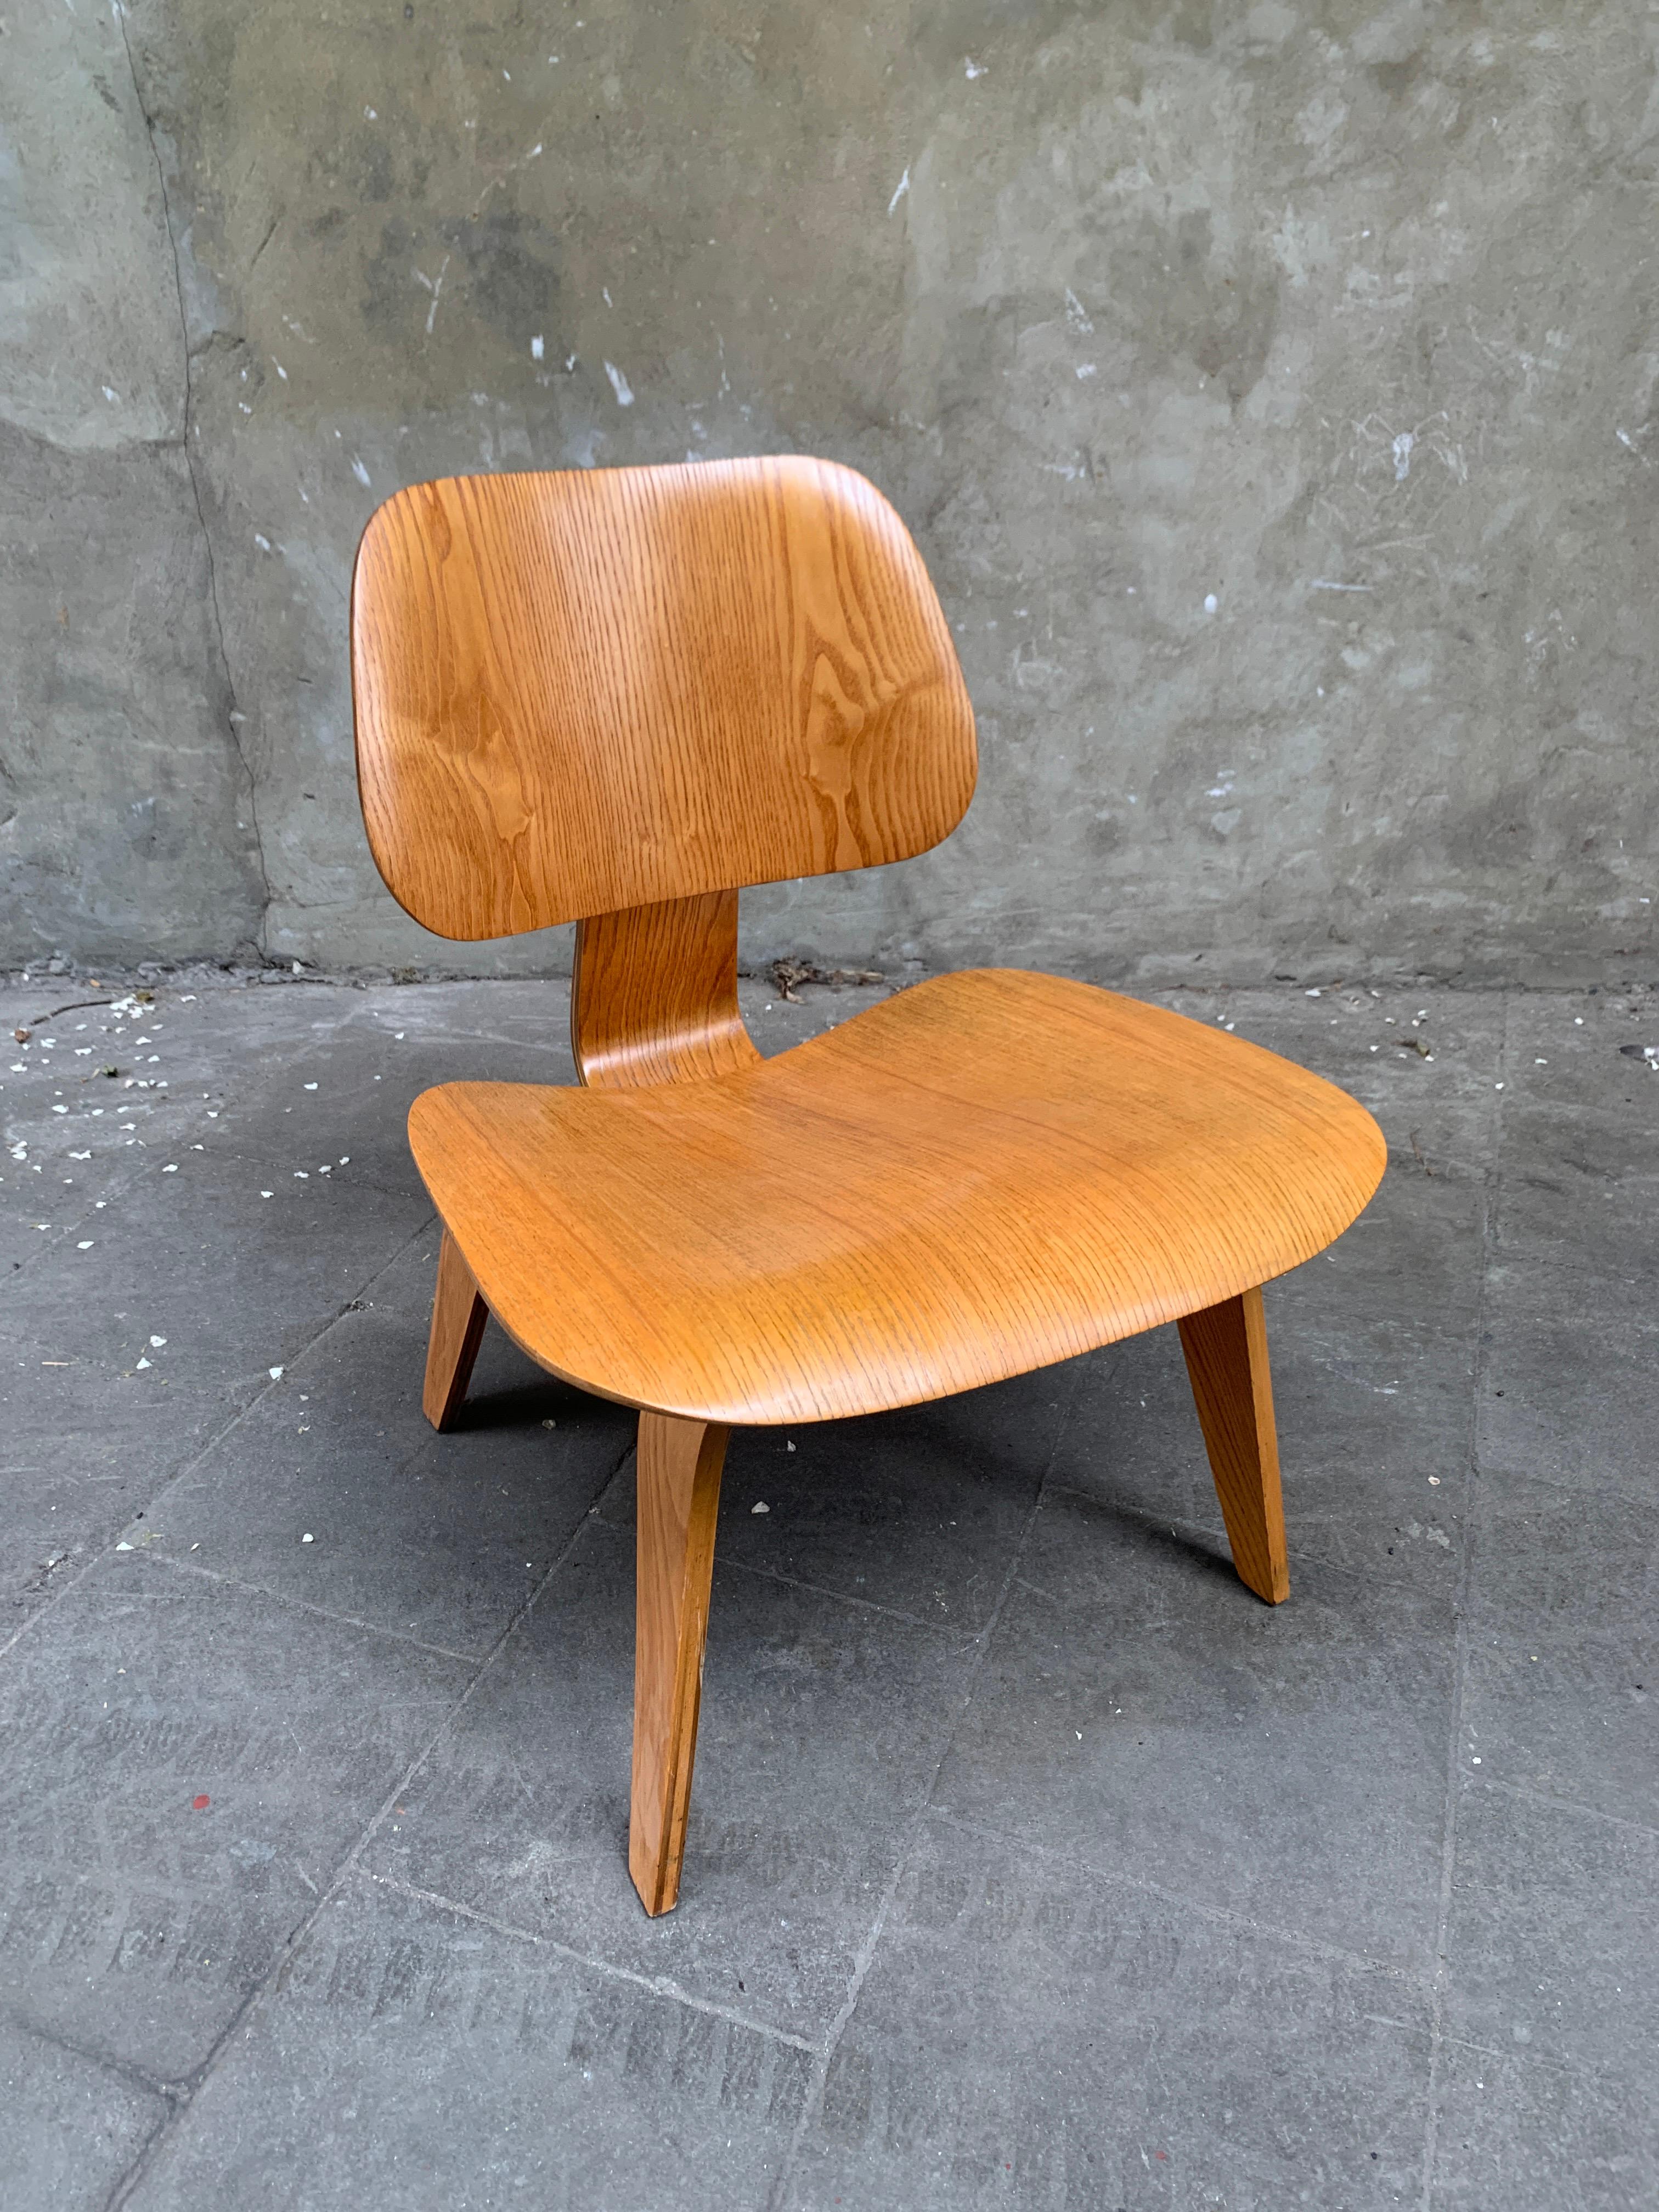 LCW (Lounge Chair Wood) chair created by Charles and Ray Eames around 1945.

Chair sold by Herman Miller, but produced by Evans Plywood in 1948-1949. The 5-2-5 screw arrangement beneath has only be used by Evans Products. Once Herman Miller has